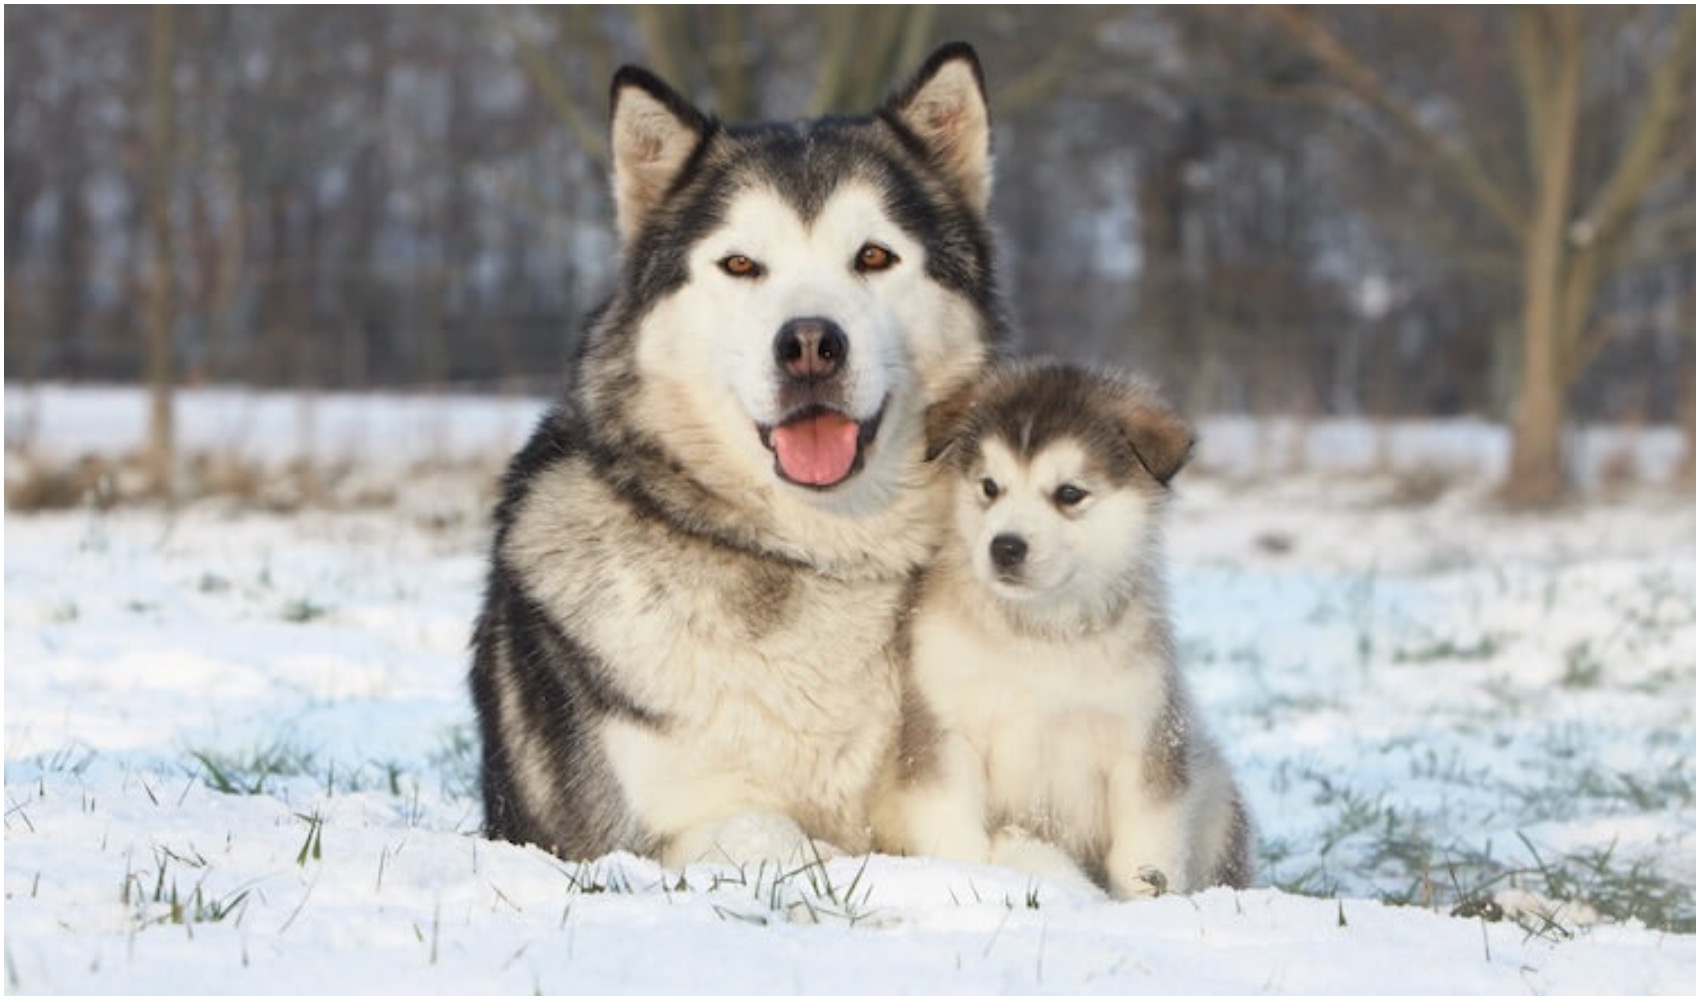 The Giant Alaskan Malamute Is a large and powerful breed of dog